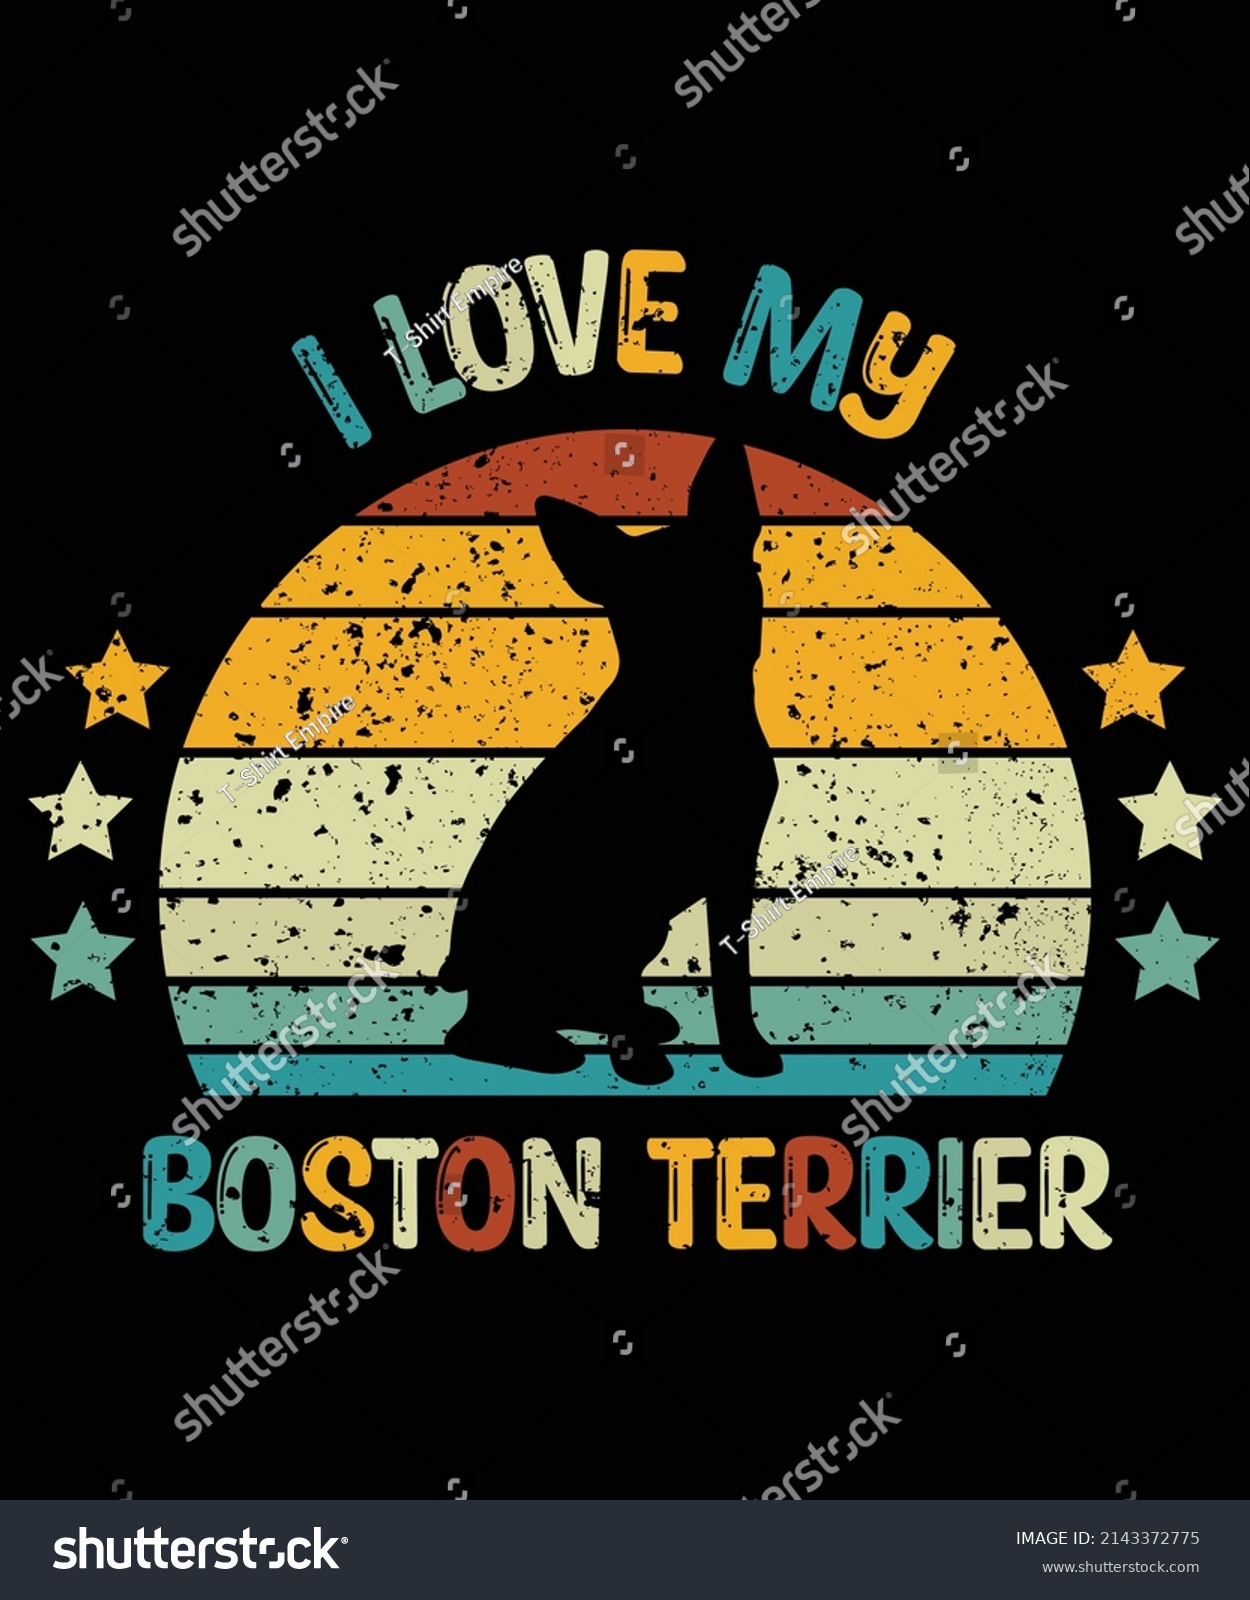 SVG of Boston Terrier silhouette vintage and retro t-shirt design
 svg